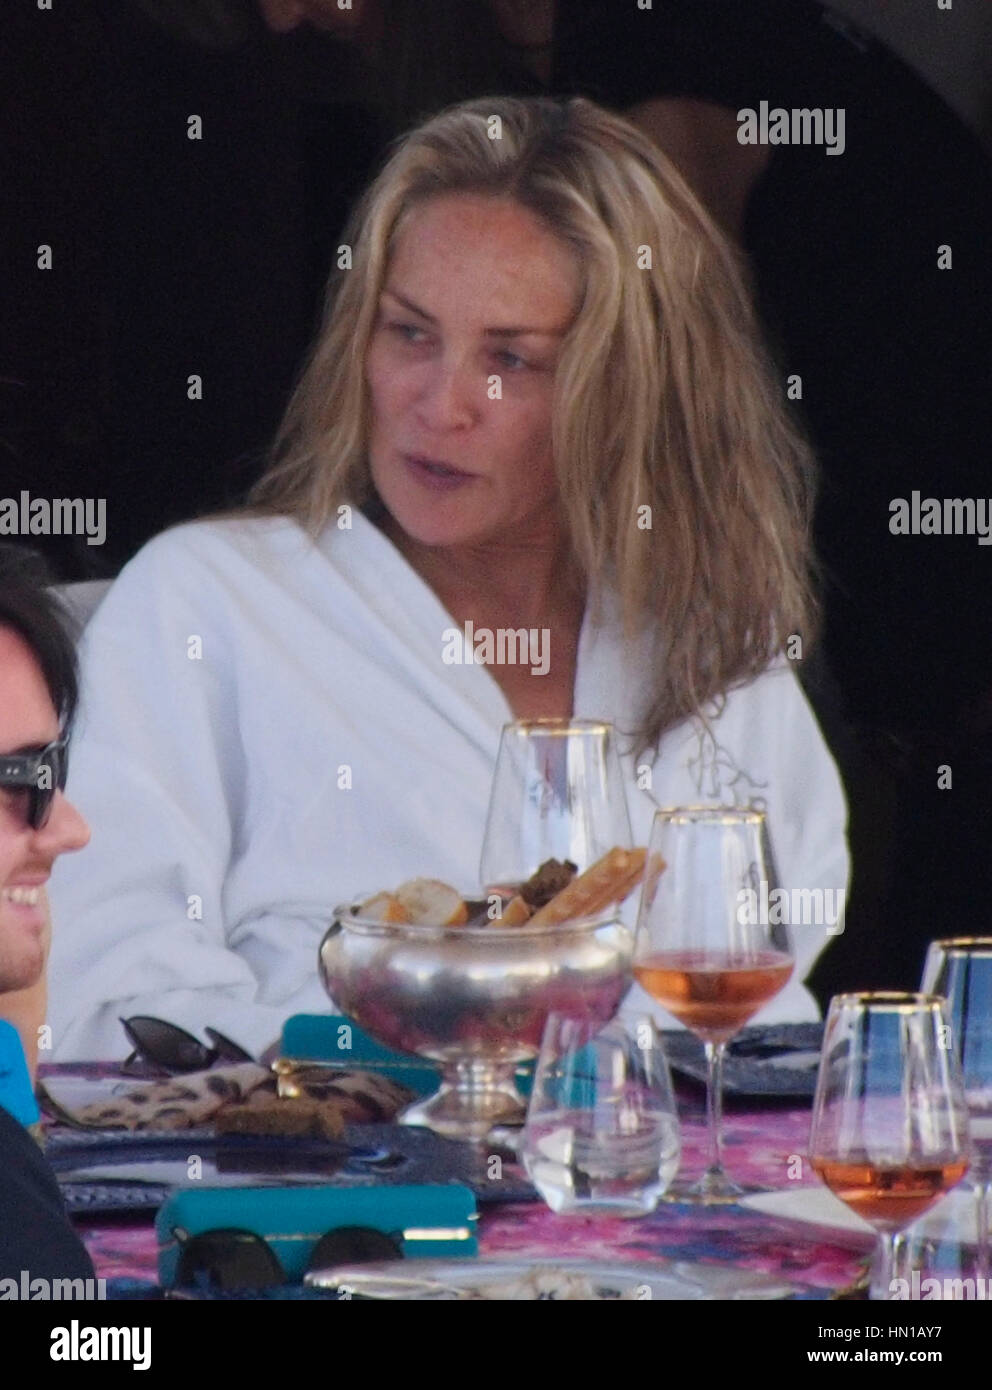 Sharon Stone eats lunch in her bathrobe and no make-up on the Roberto Cavalli yacht in the harbor at the 66th Cannes Film Festival in Cannes, France on May 21, 2013. Photo by Francis Specker Stock Photo